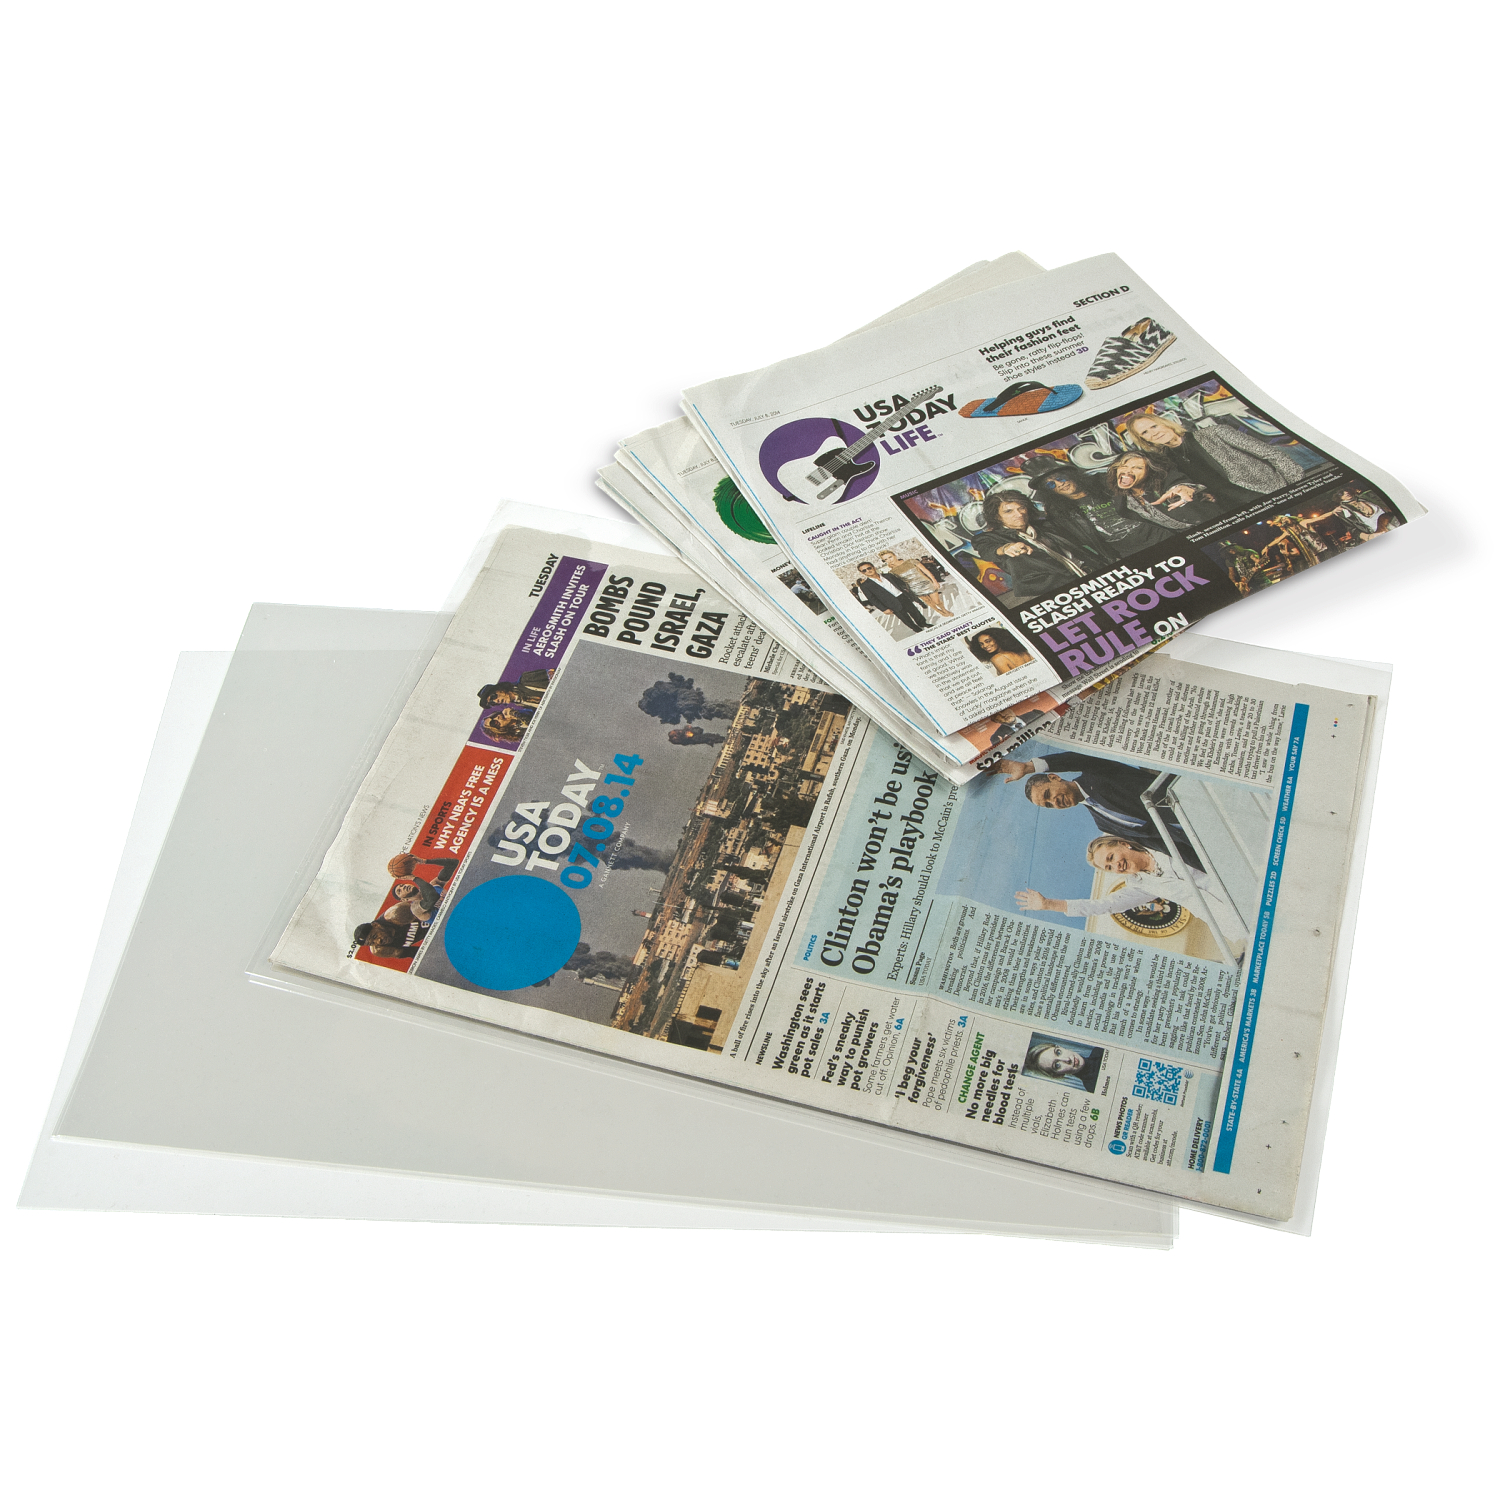 Gaylord Archival® 3 mil Archival Polyester Newspaper Sleeves (5-Pack), Archival Envelopes, Sleeves & Protectors, Preservation